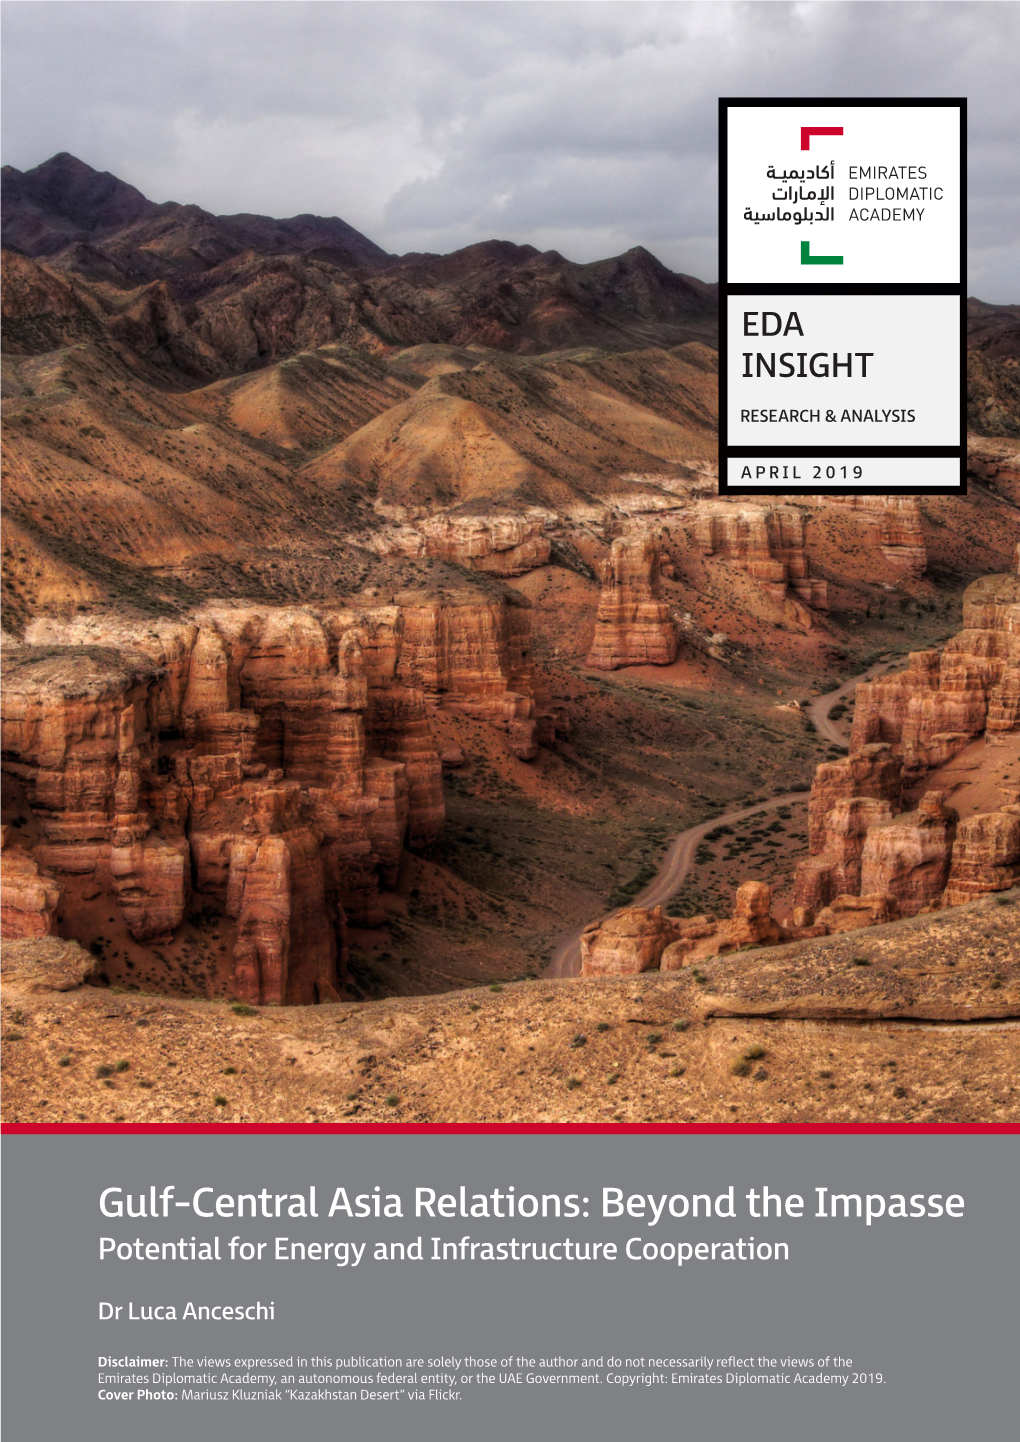 Gulf-Central Asia Relations: Beyond the Impasse Potential for Energy and Infrastructure Cooperation